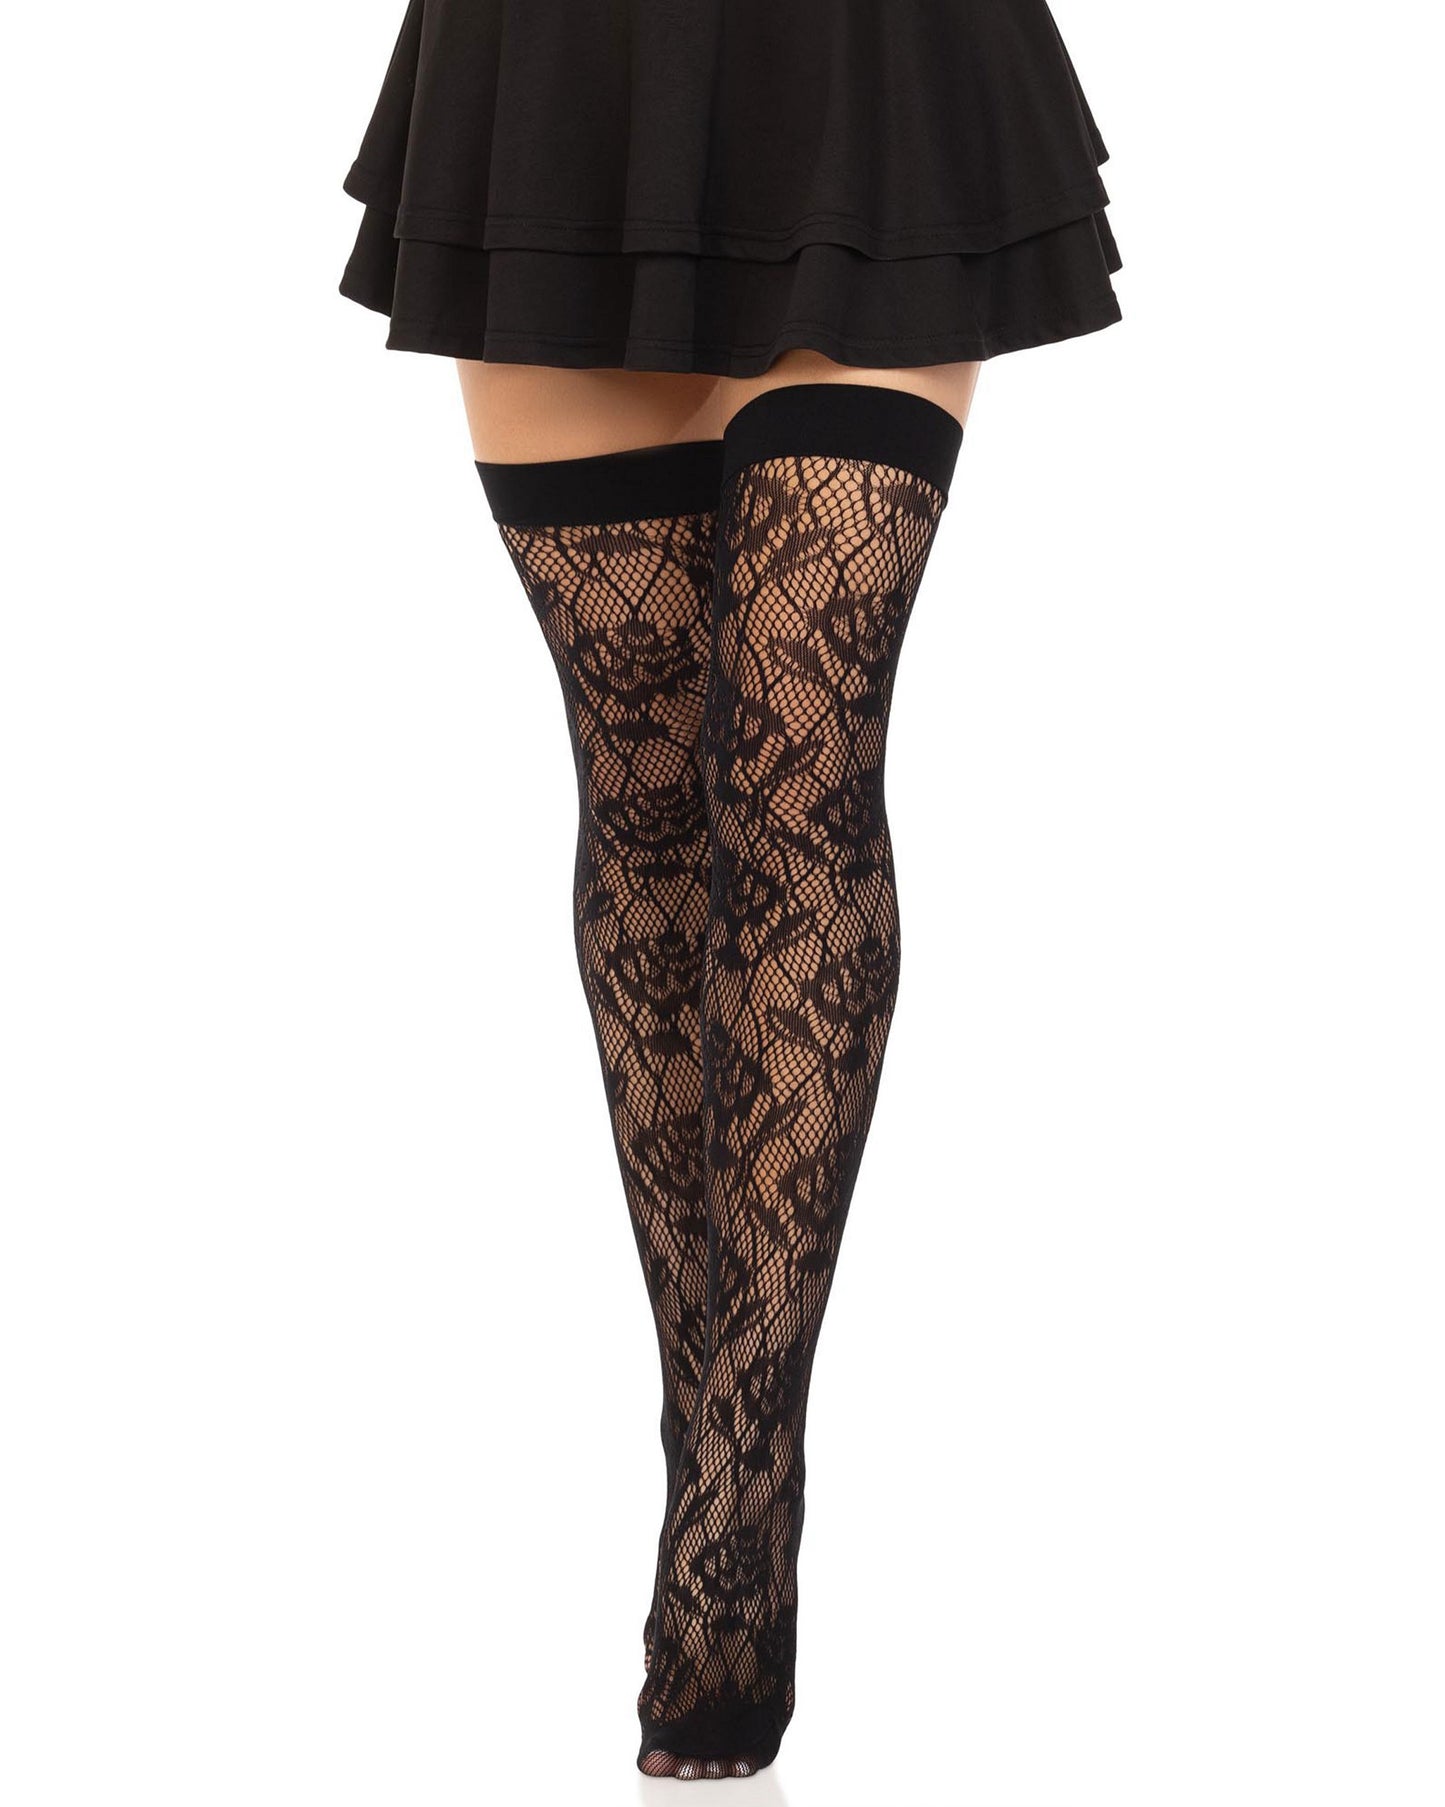 Leg Avenue 6216 Wild Rose Net Thigh Highs - Black openwork thigh high socks with a floral pattern and deep elasticated cuff. Worn with a black ra-ra skirt.